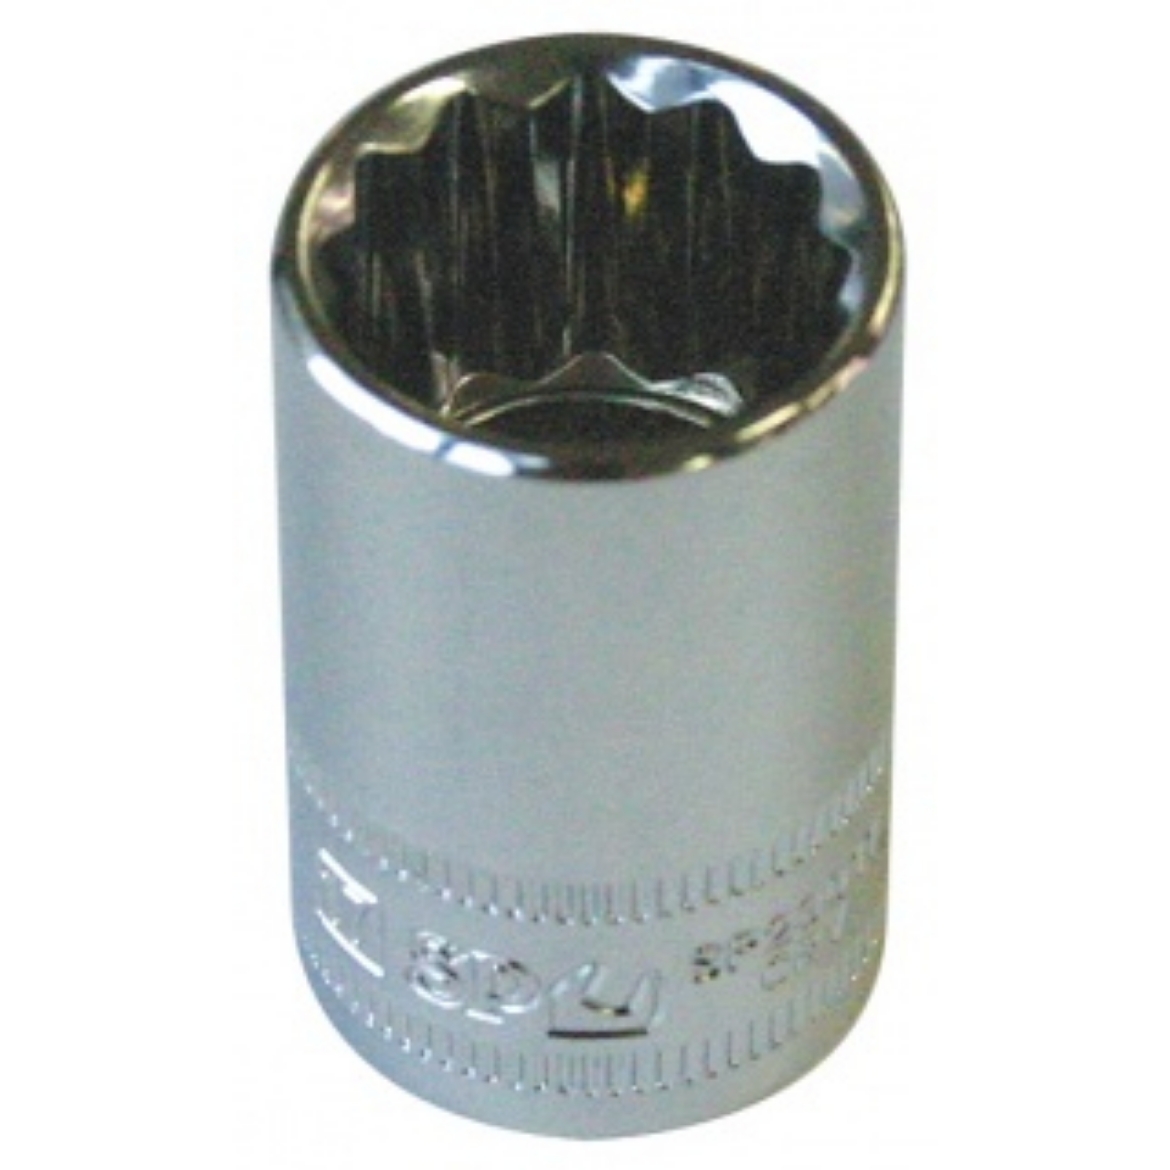 Picture of SOCKET 1/2"DR 12PT METRIC 16MM SP TOOLS